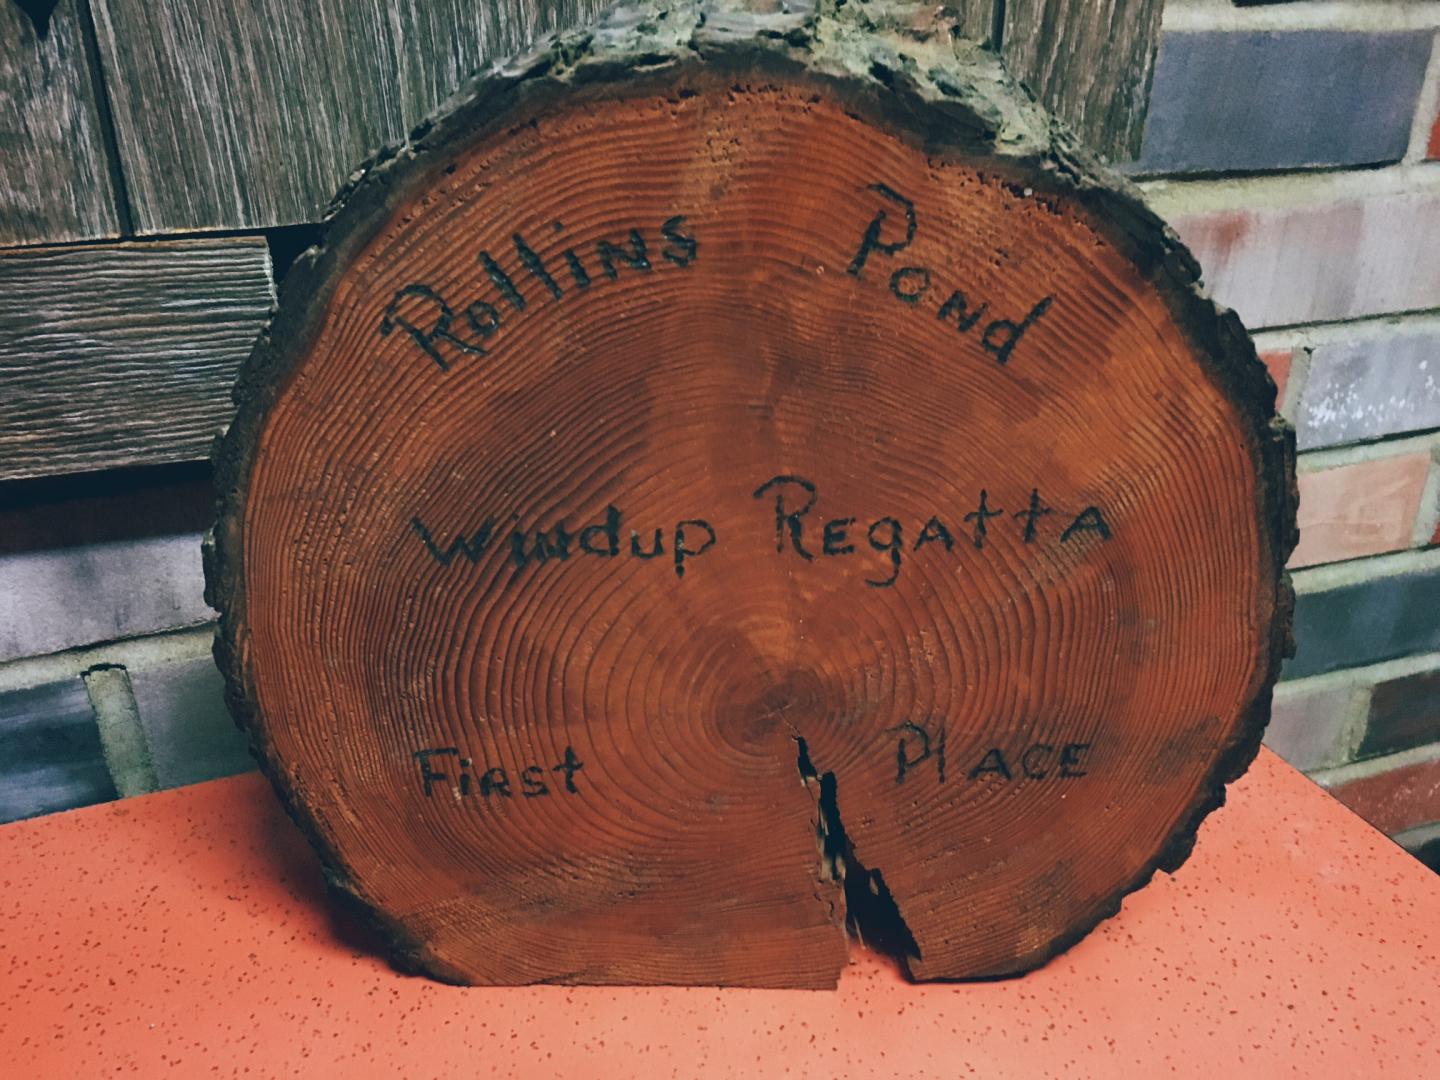 First prize at the ‘Wind-up-Regatta’